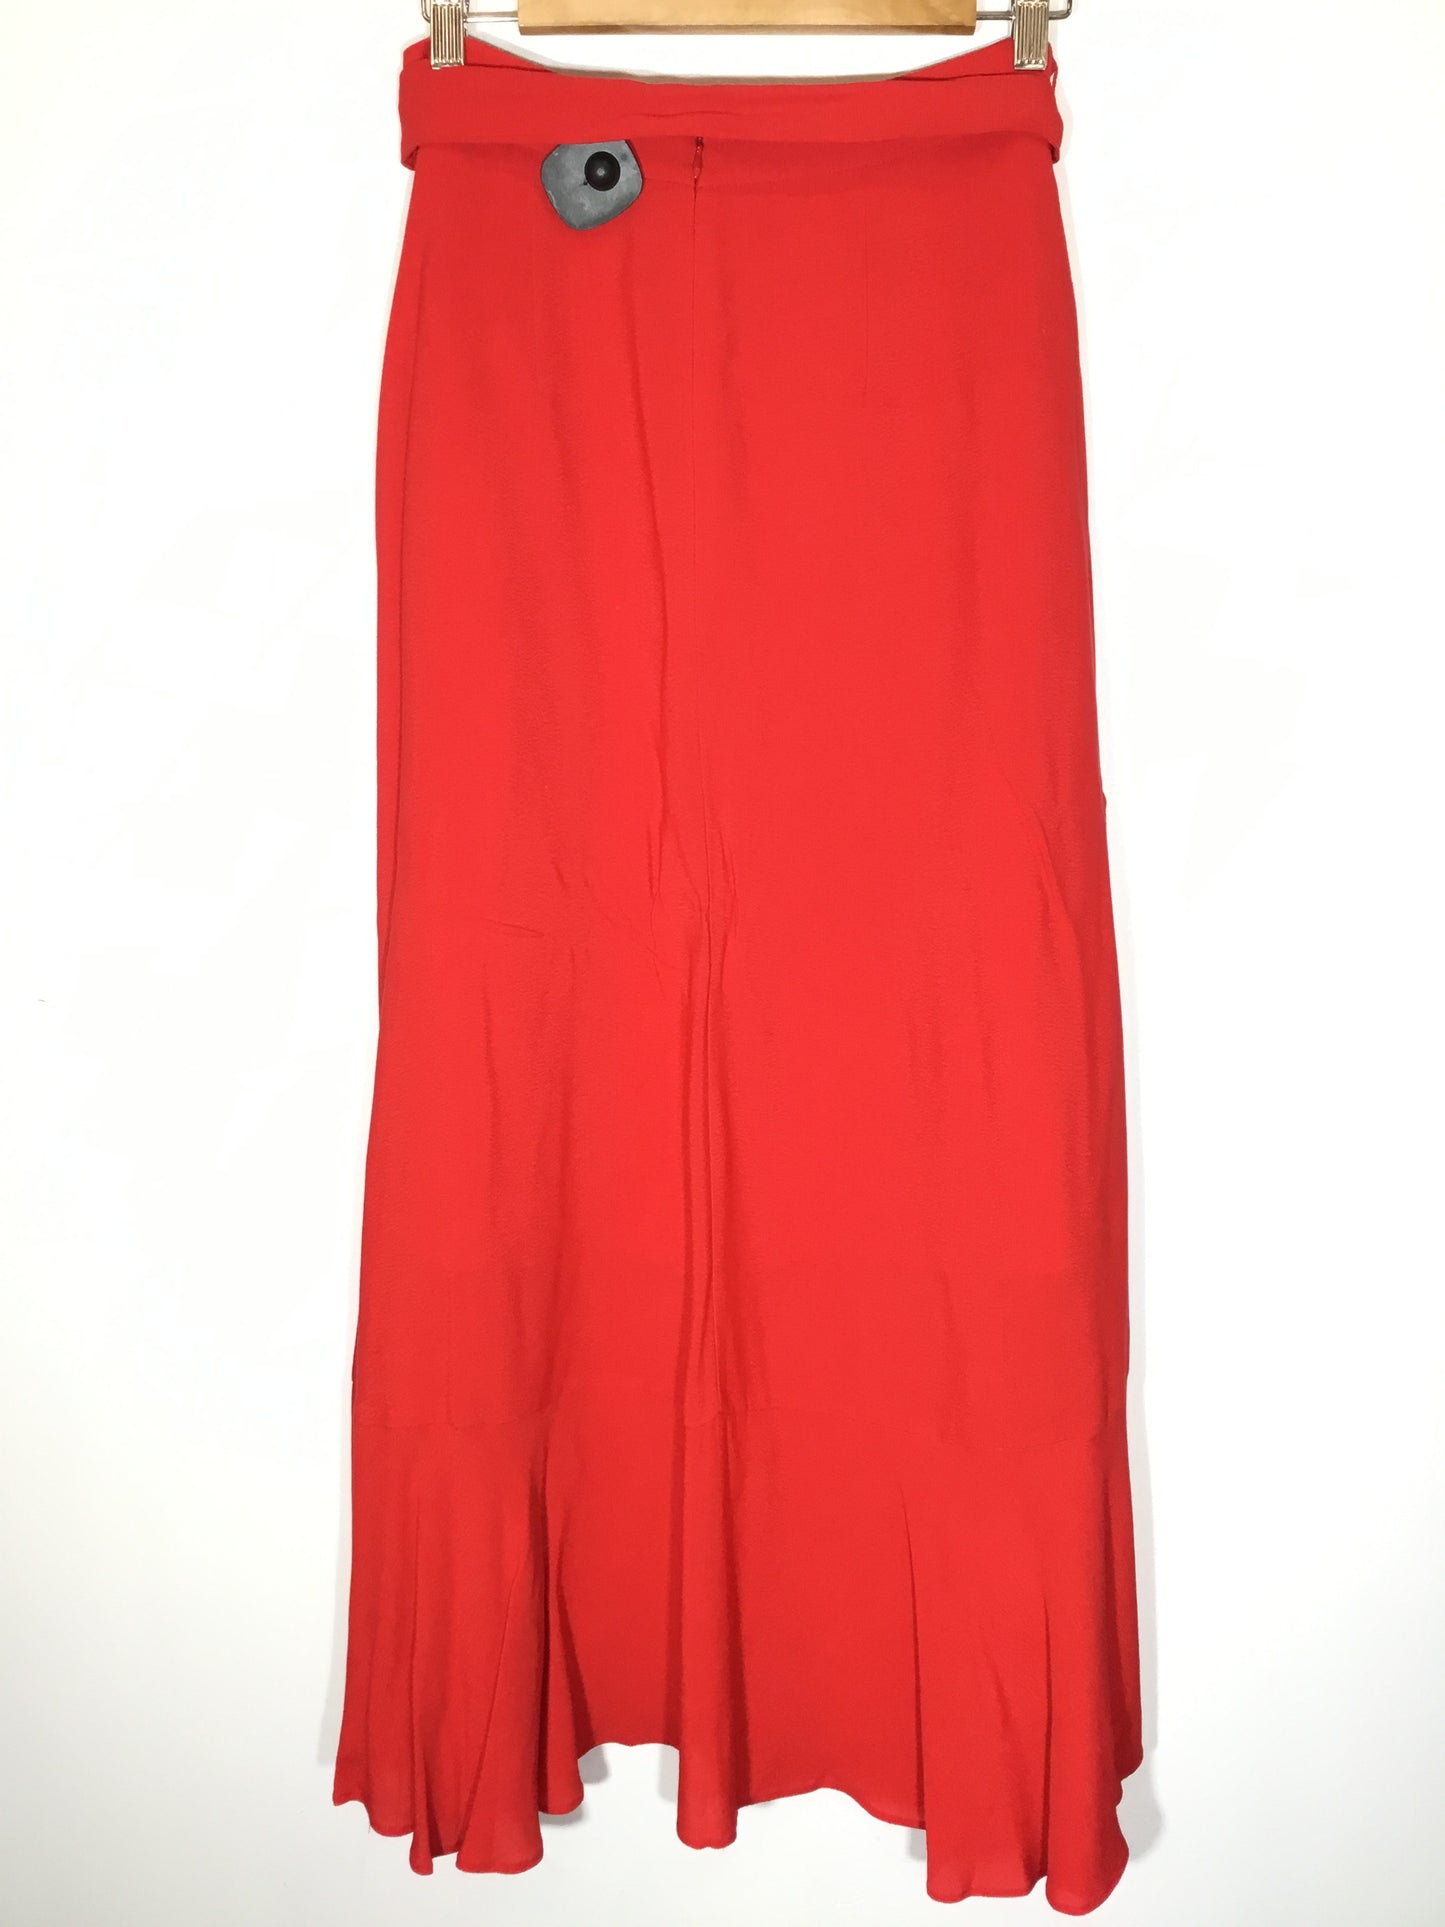 Skirt Maxi By Ann Taylor  Size: 6